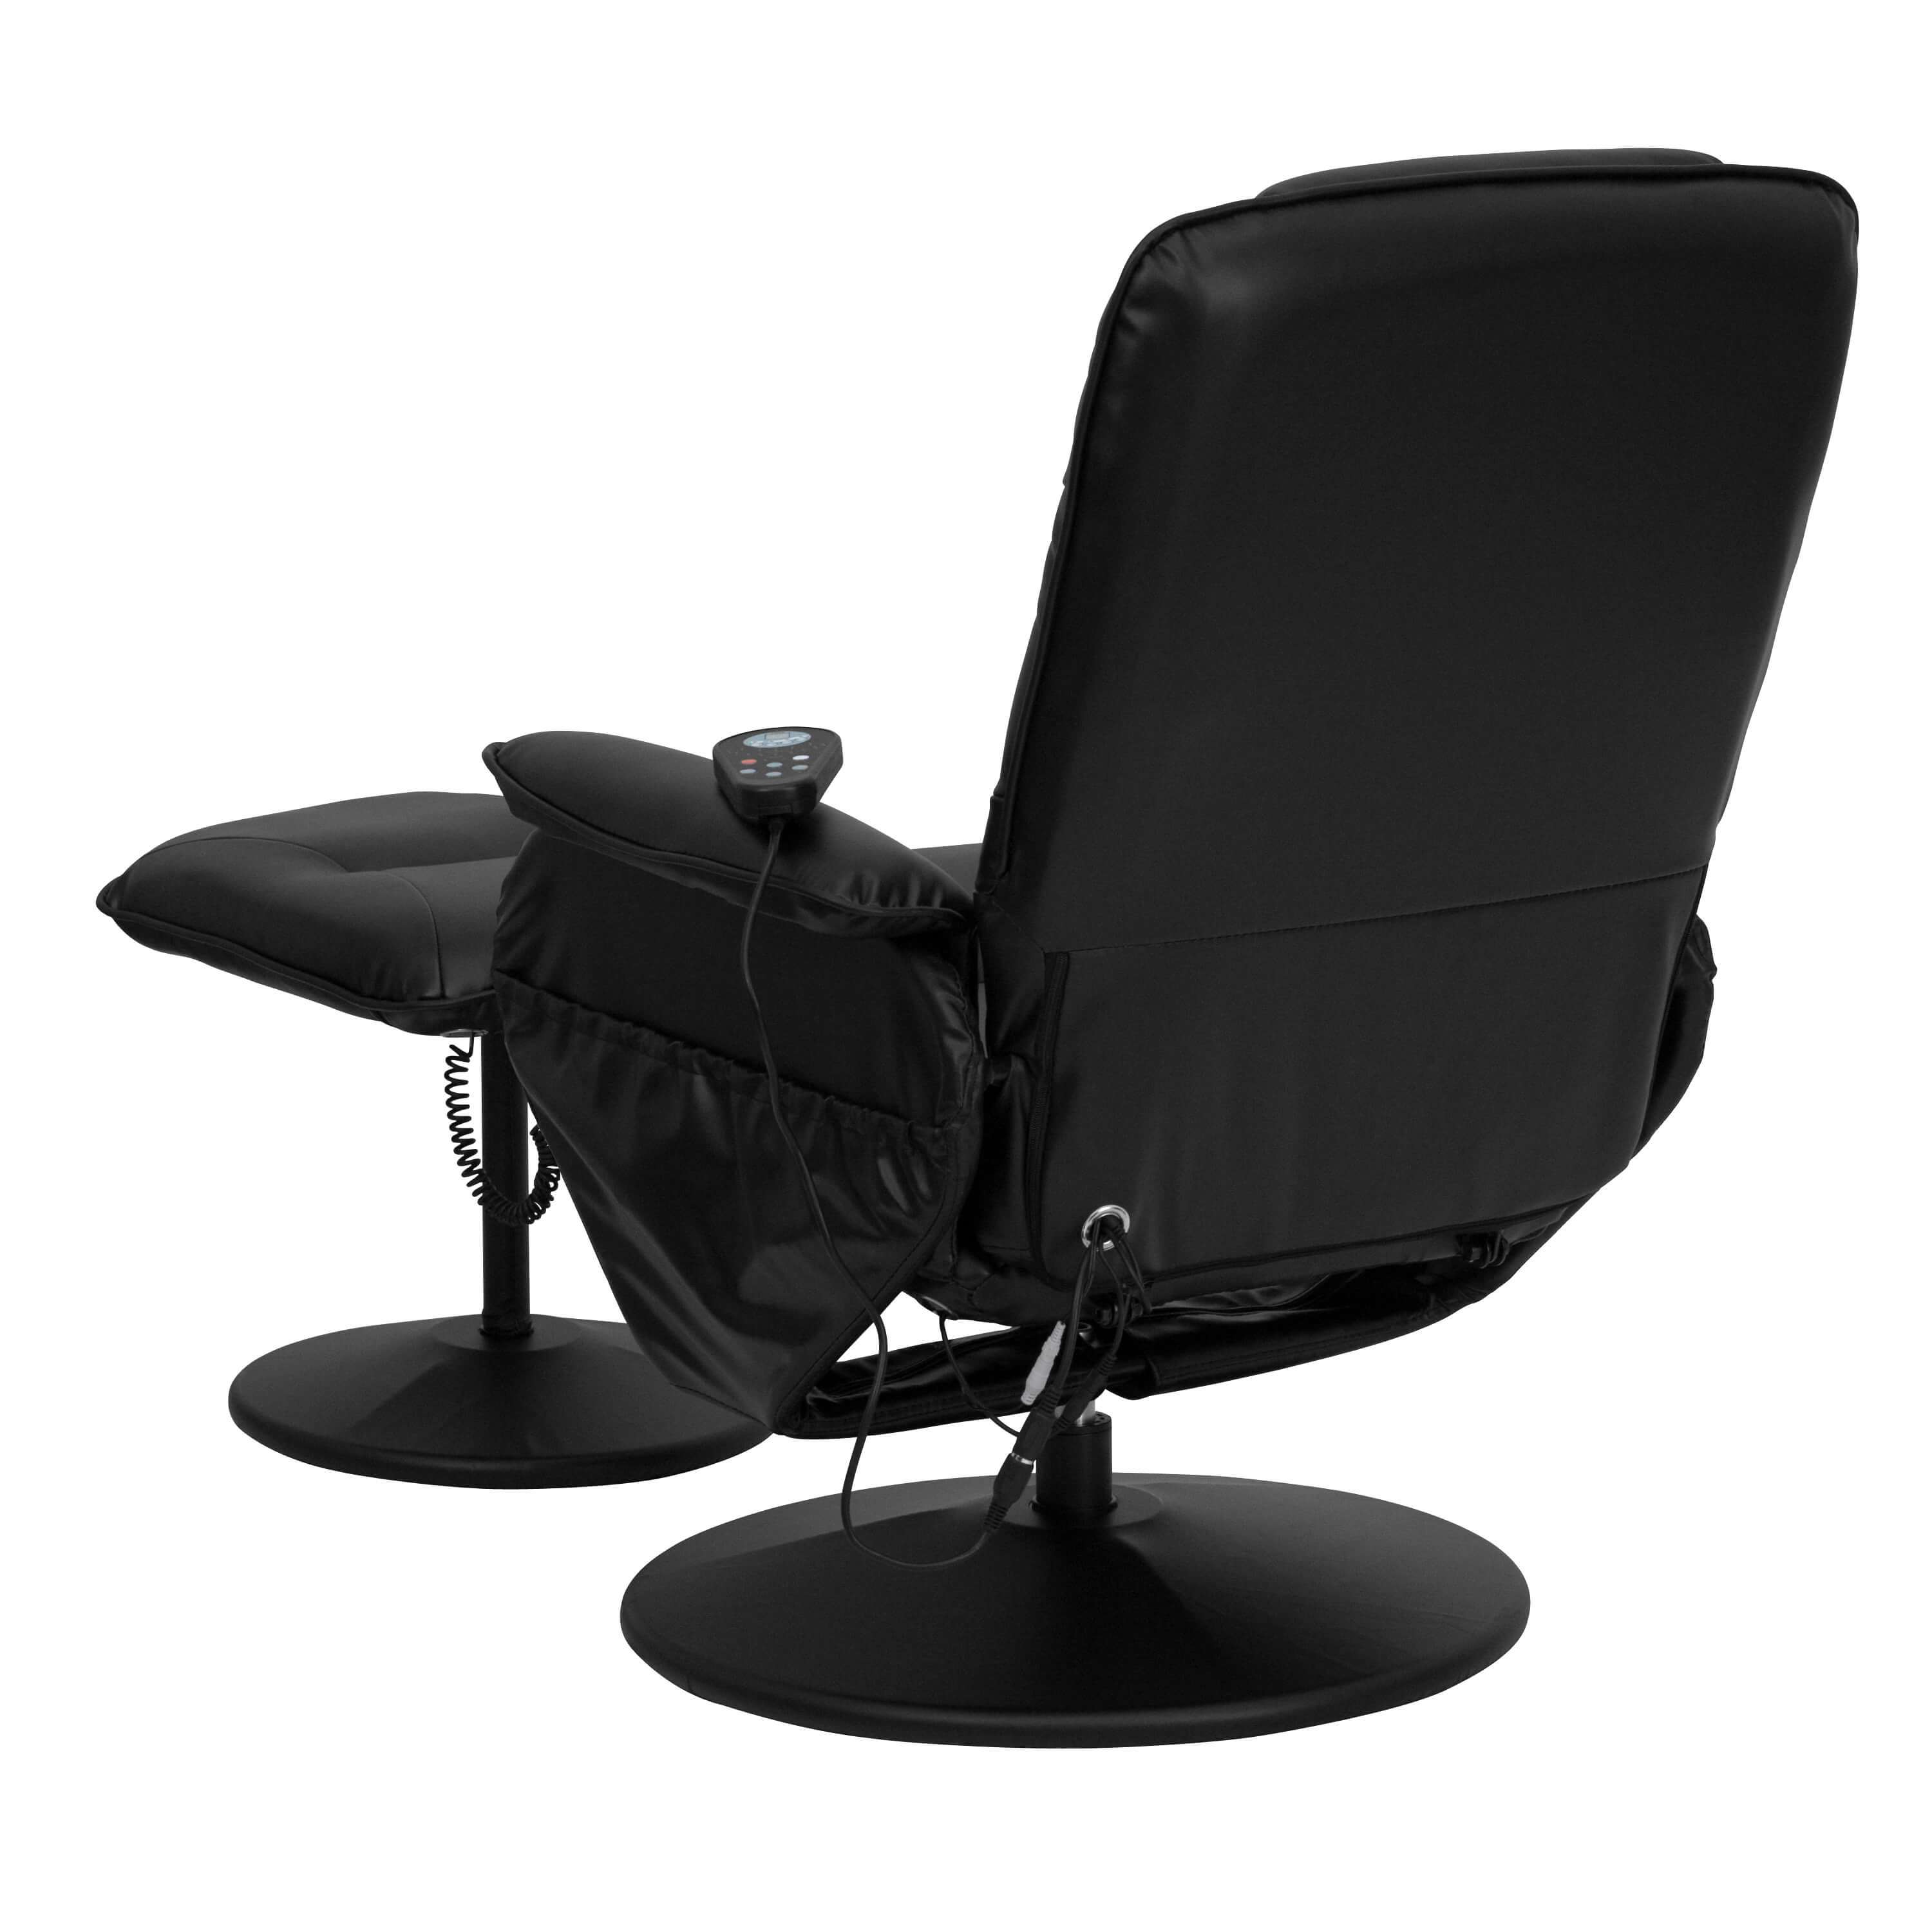 Recliner chair with massage back view